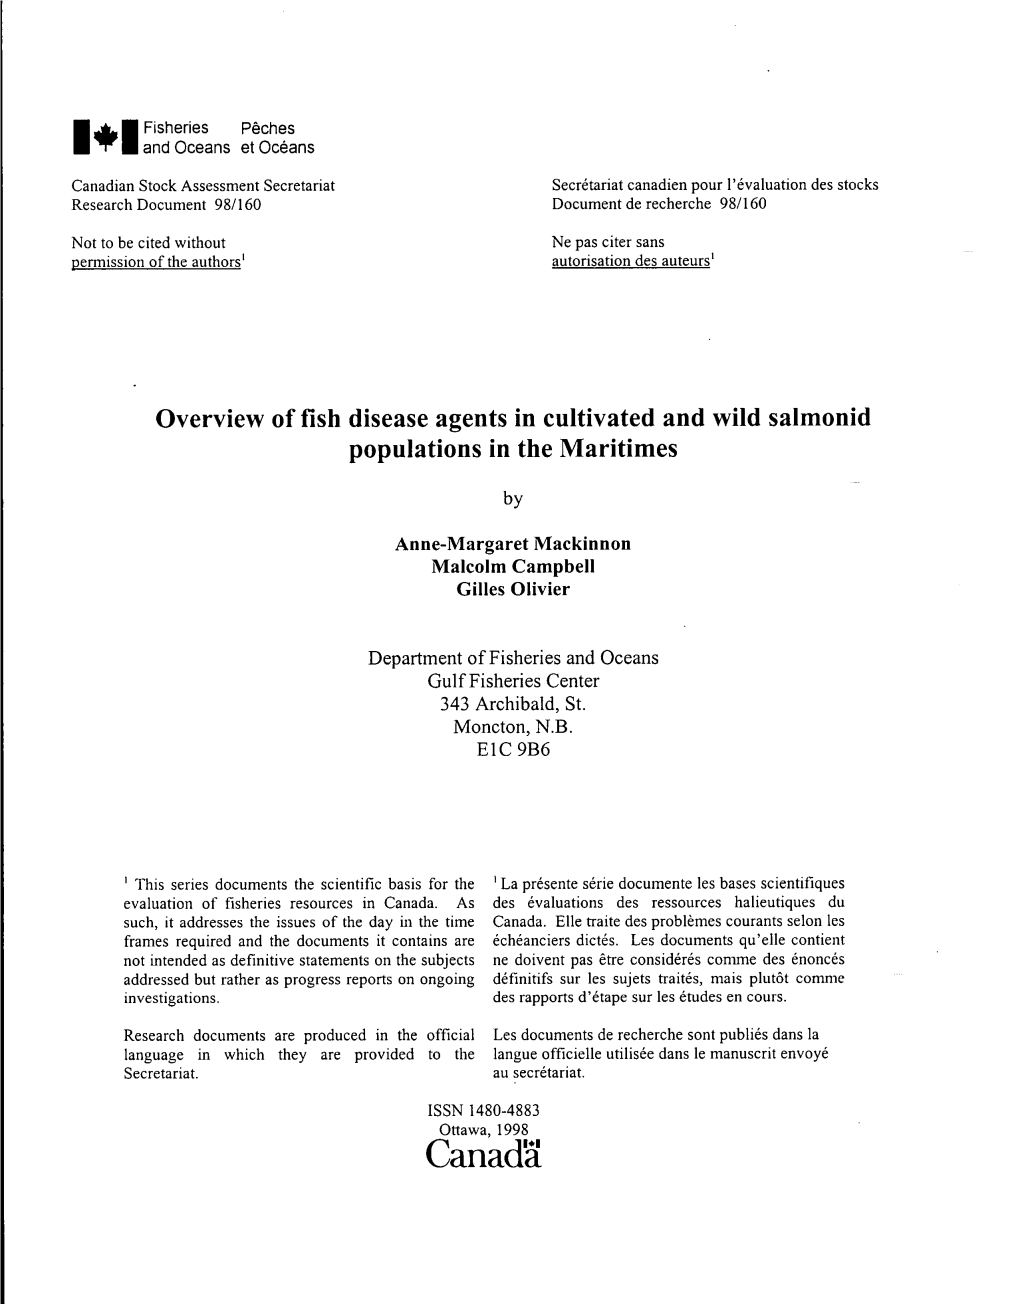 Overview of Fish Disease Agents in Cultivated and Wild Salmonid Populations in the Maritimes